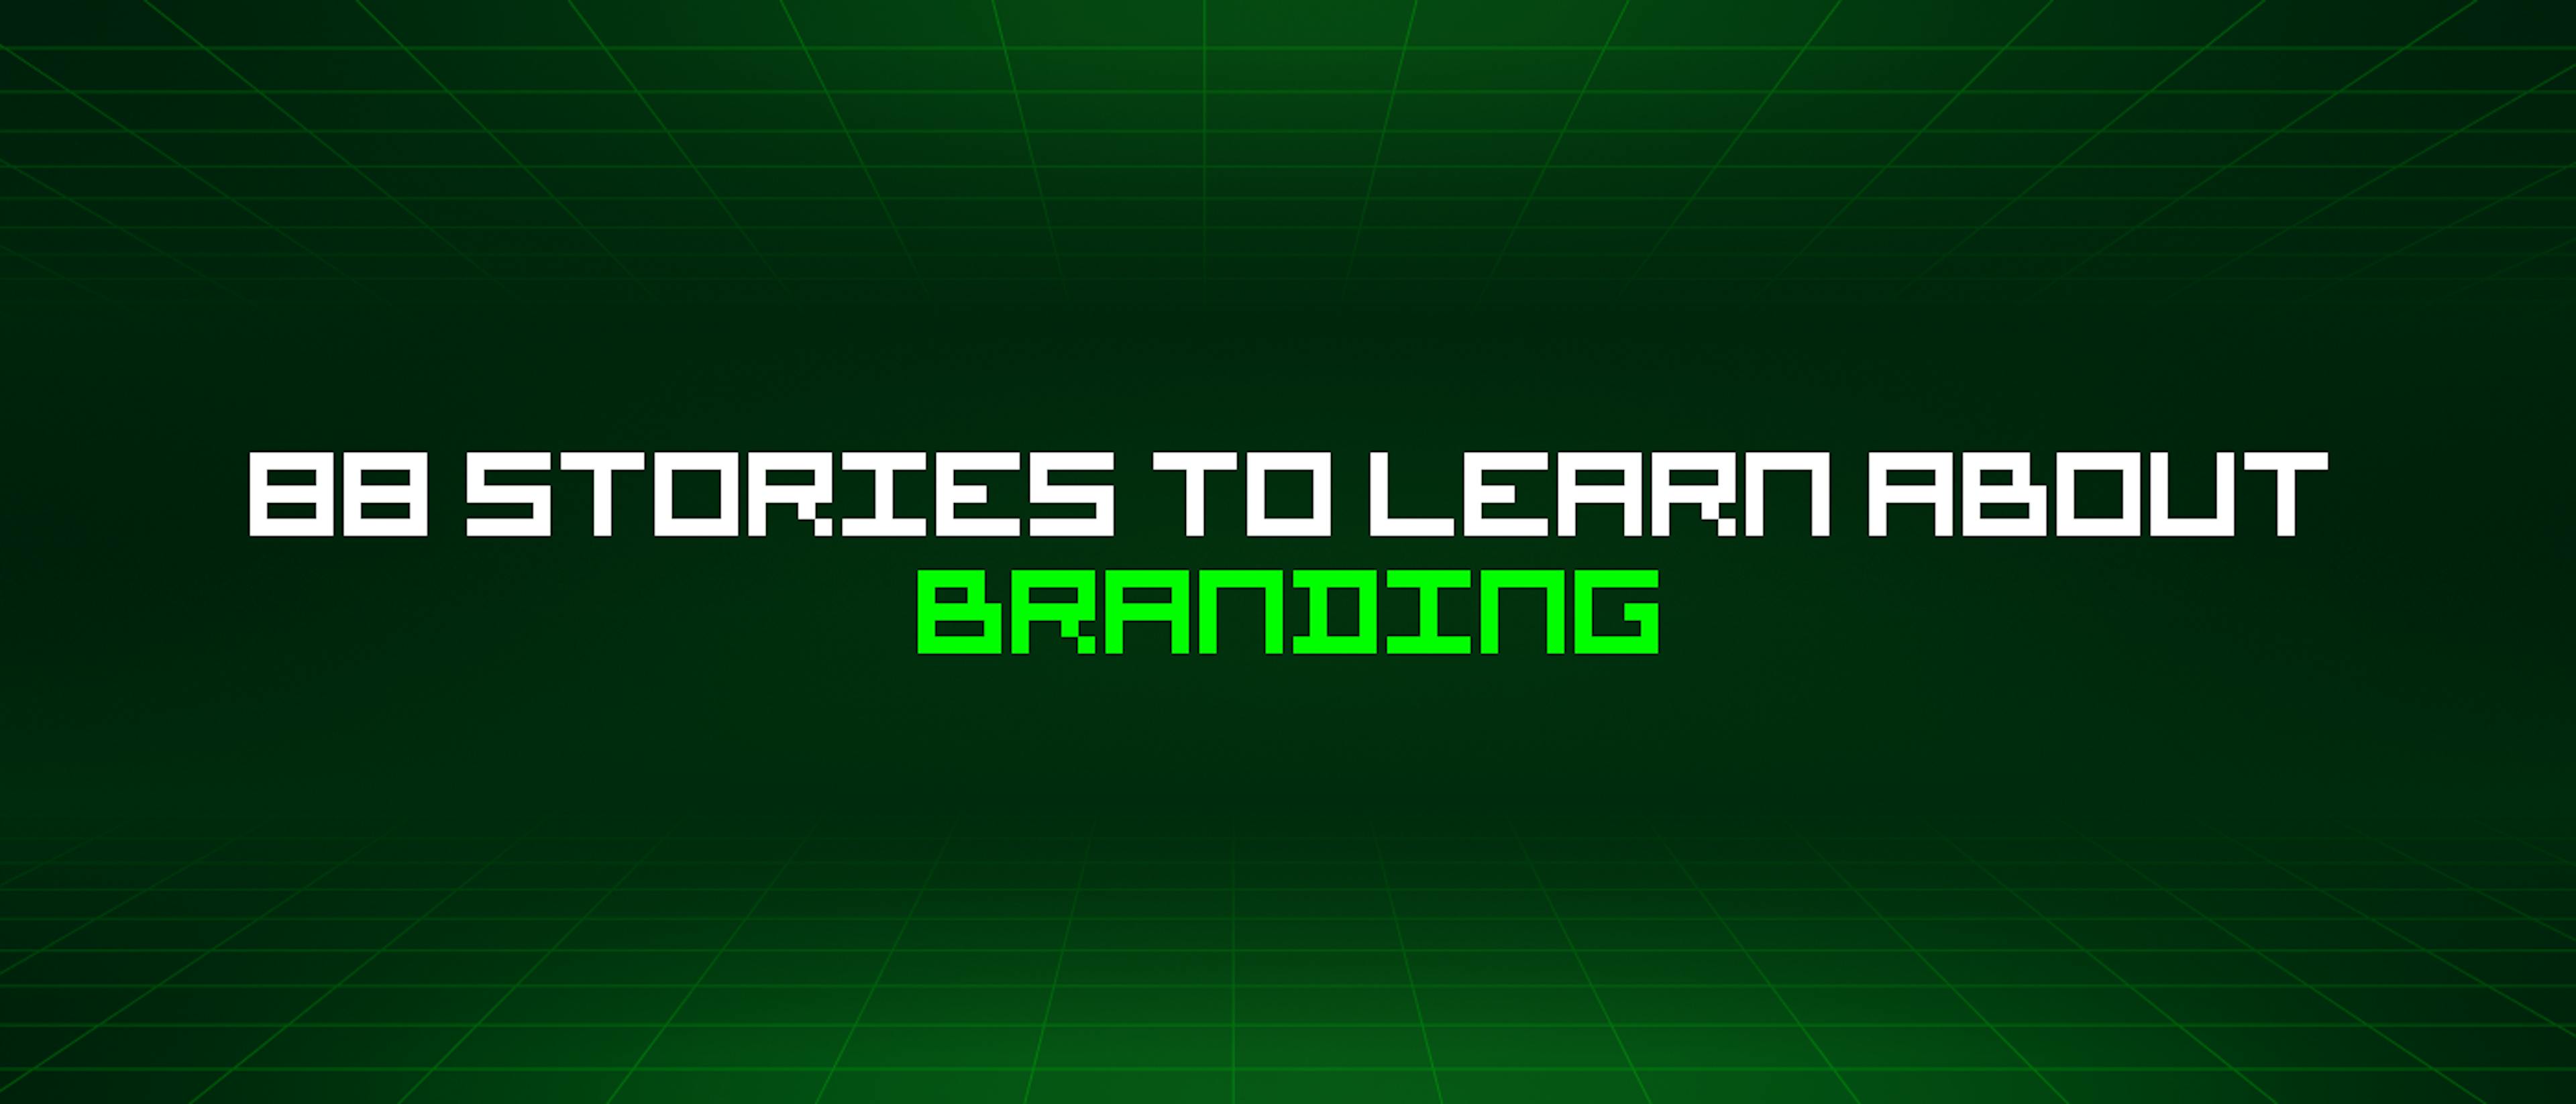 featured image - 88 Stories To Learn About Branding